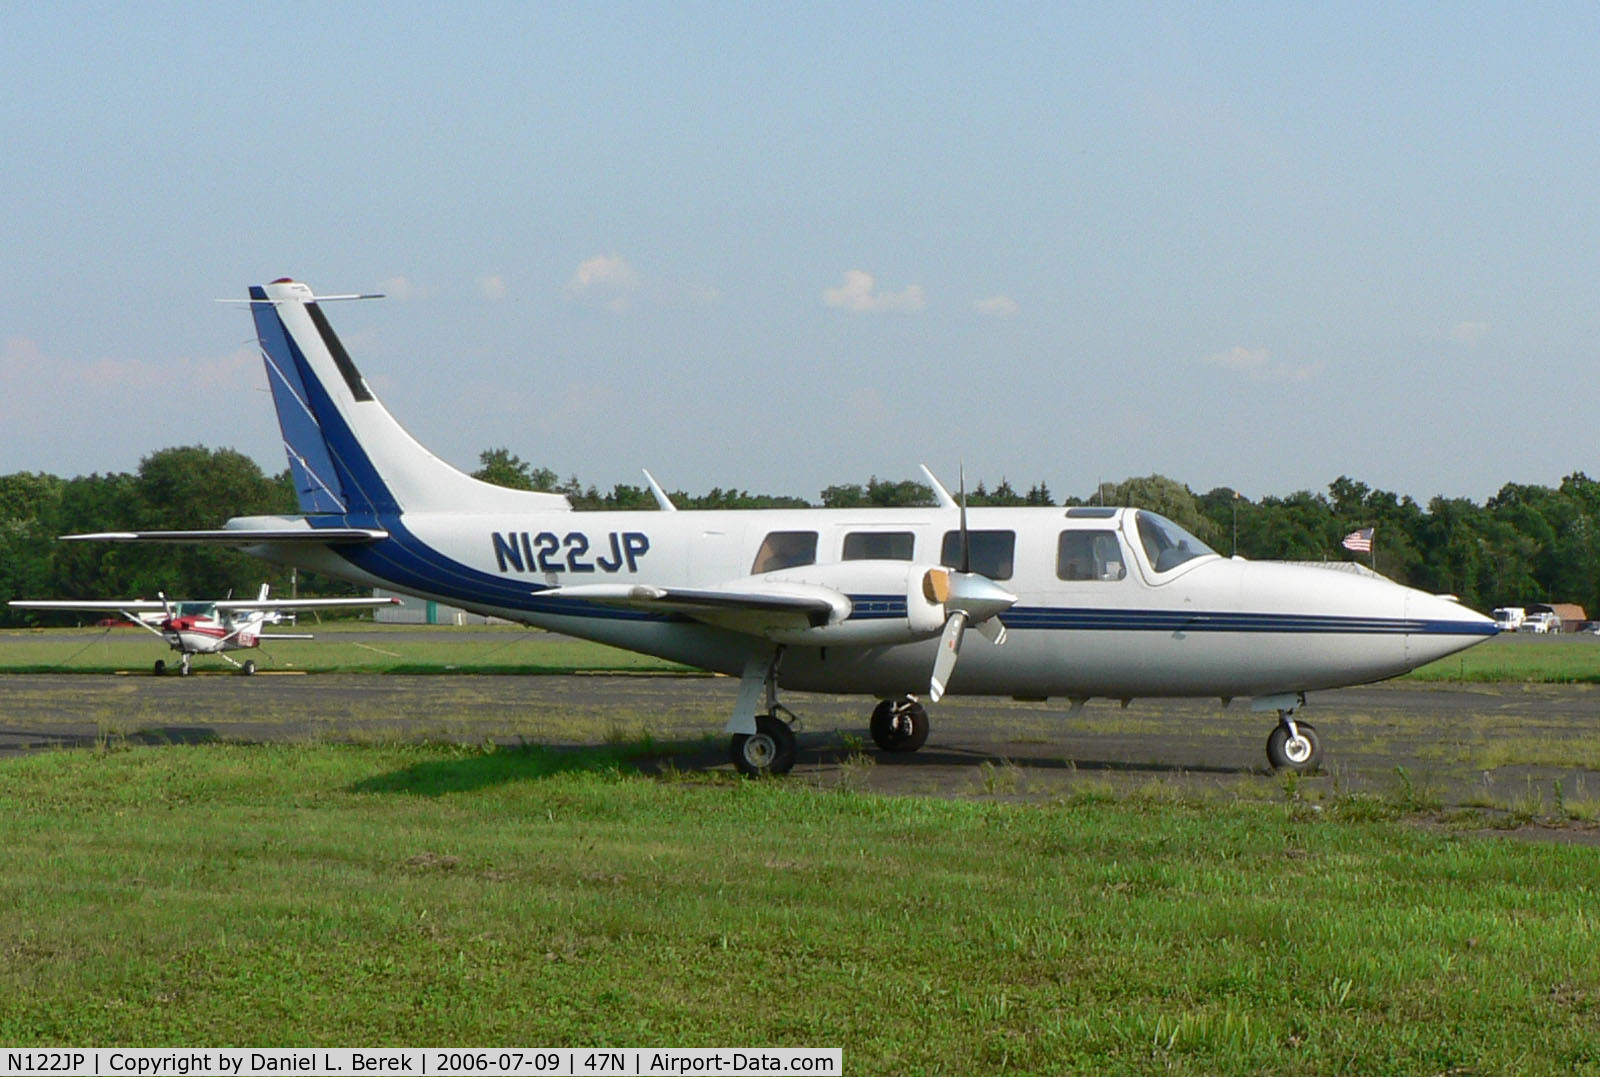 N122JP, 1978 Piper Aerostar 601P C/N 61P-0535227, The Aerostar has an unmistakable profile, as seen here at Centeral Jersey Regional.